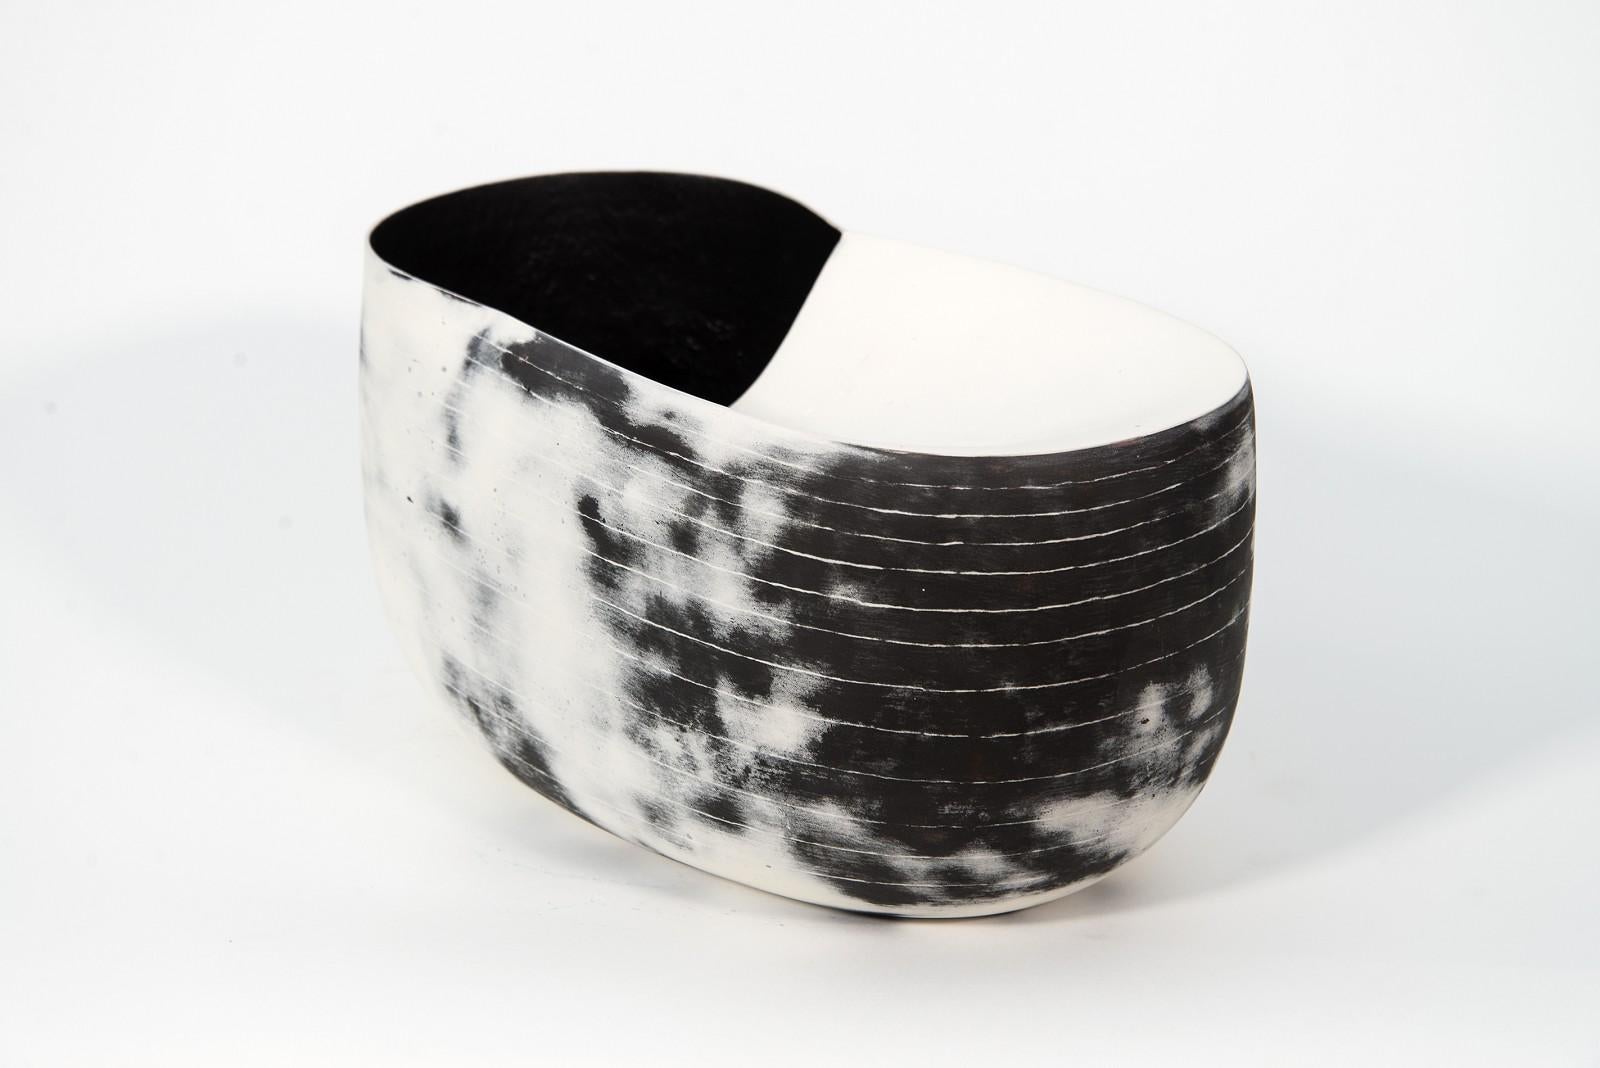 Steven Heinemann Abstract Sculpture - Borealis - black and white, nature inspired, elongated, ceramic, tabletop vessel